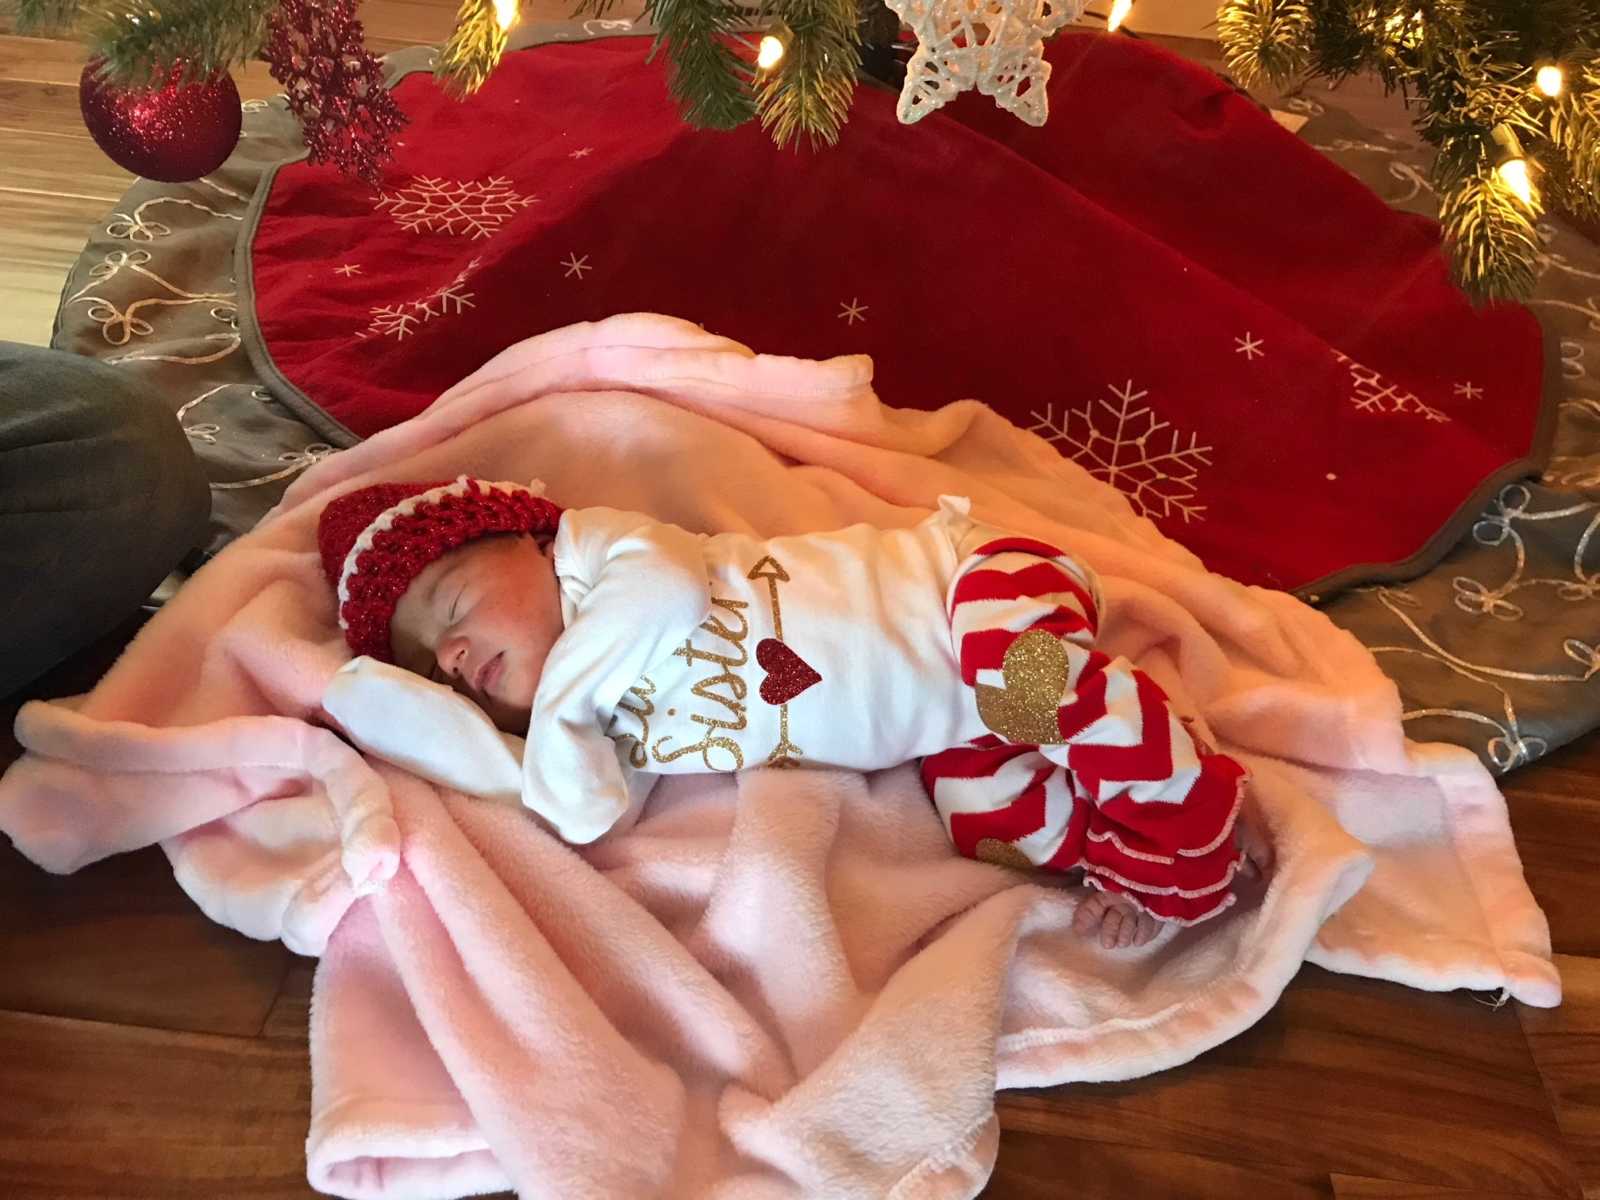 newborn baby girl lying under Christmas tree in pink blanket with shirt saying sister on it